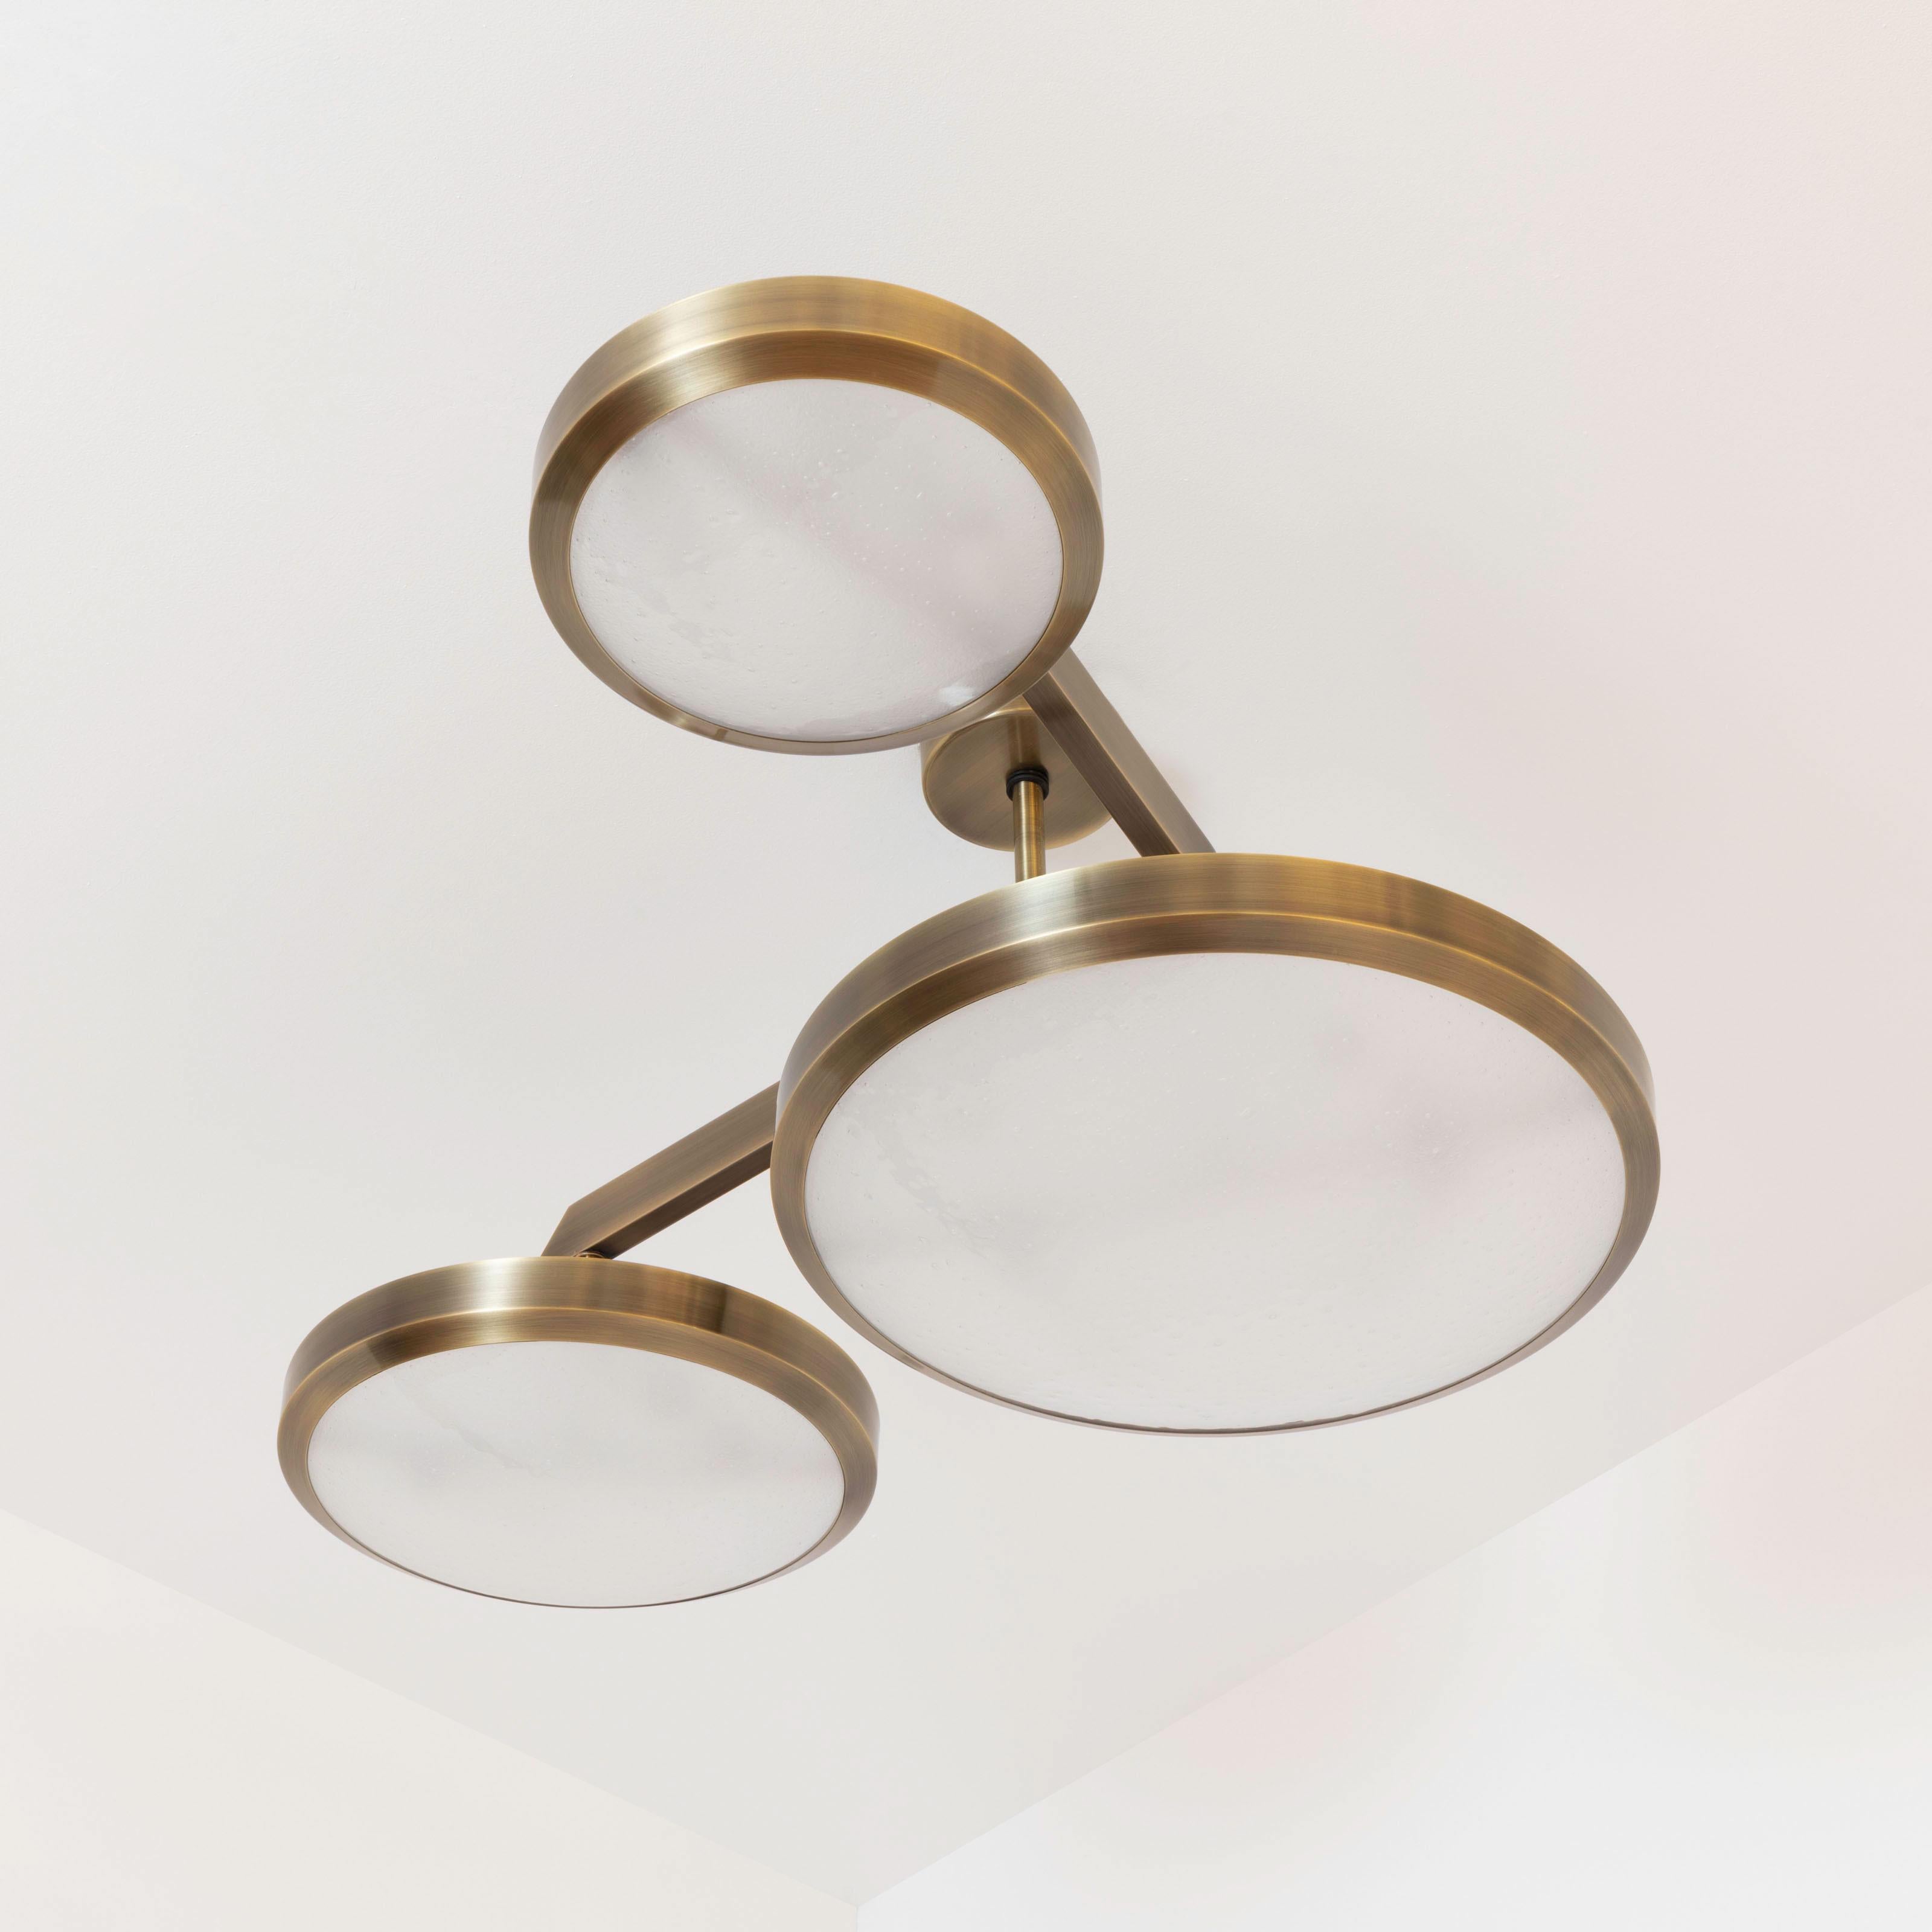 Brass Zeta Ceiling Light by Gaspare Asaro - Polished Nickel Finish For Sale